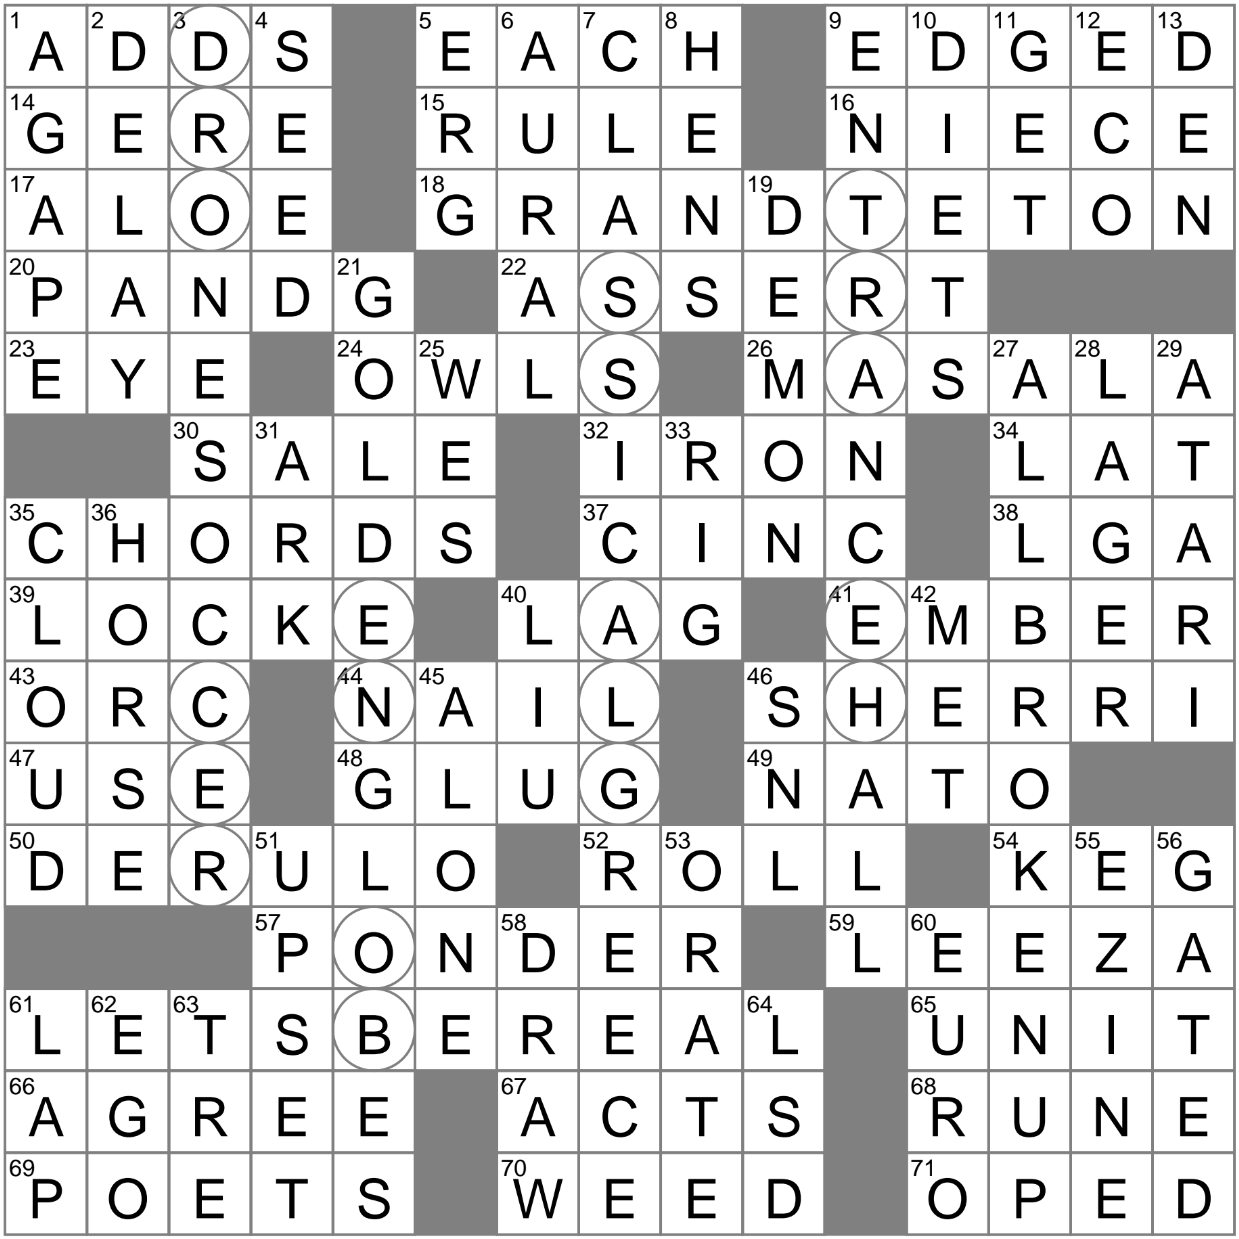 A crossword a day keeps the boredom away! - PlaySimple Games in 2023